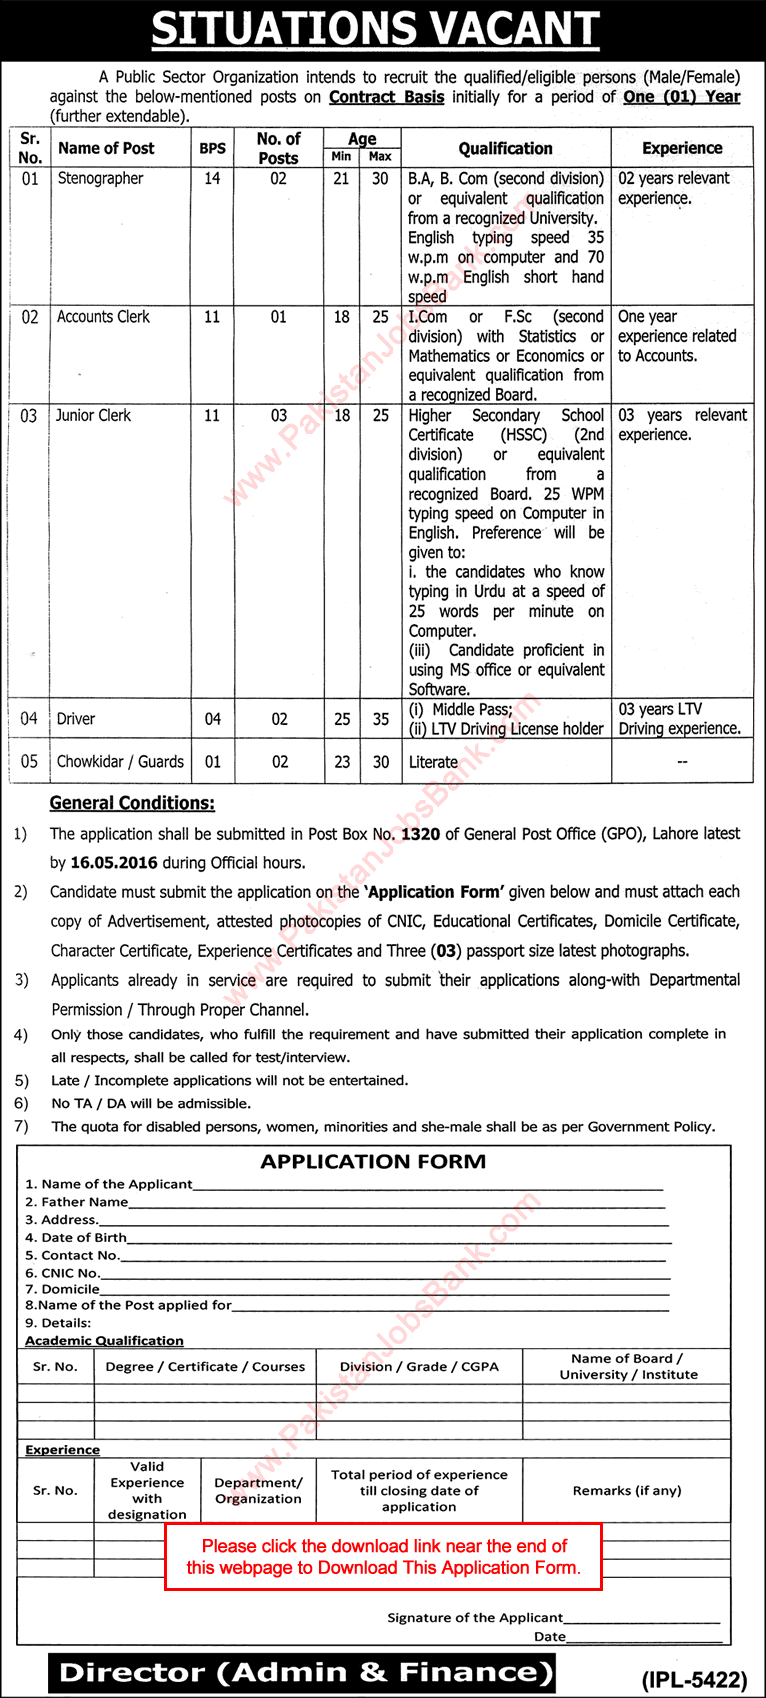 PO Box 1320 GPO Lahore Jobs 2016 May Application Form Clerks, Stenographers, Drivers & Chowkidar Latest